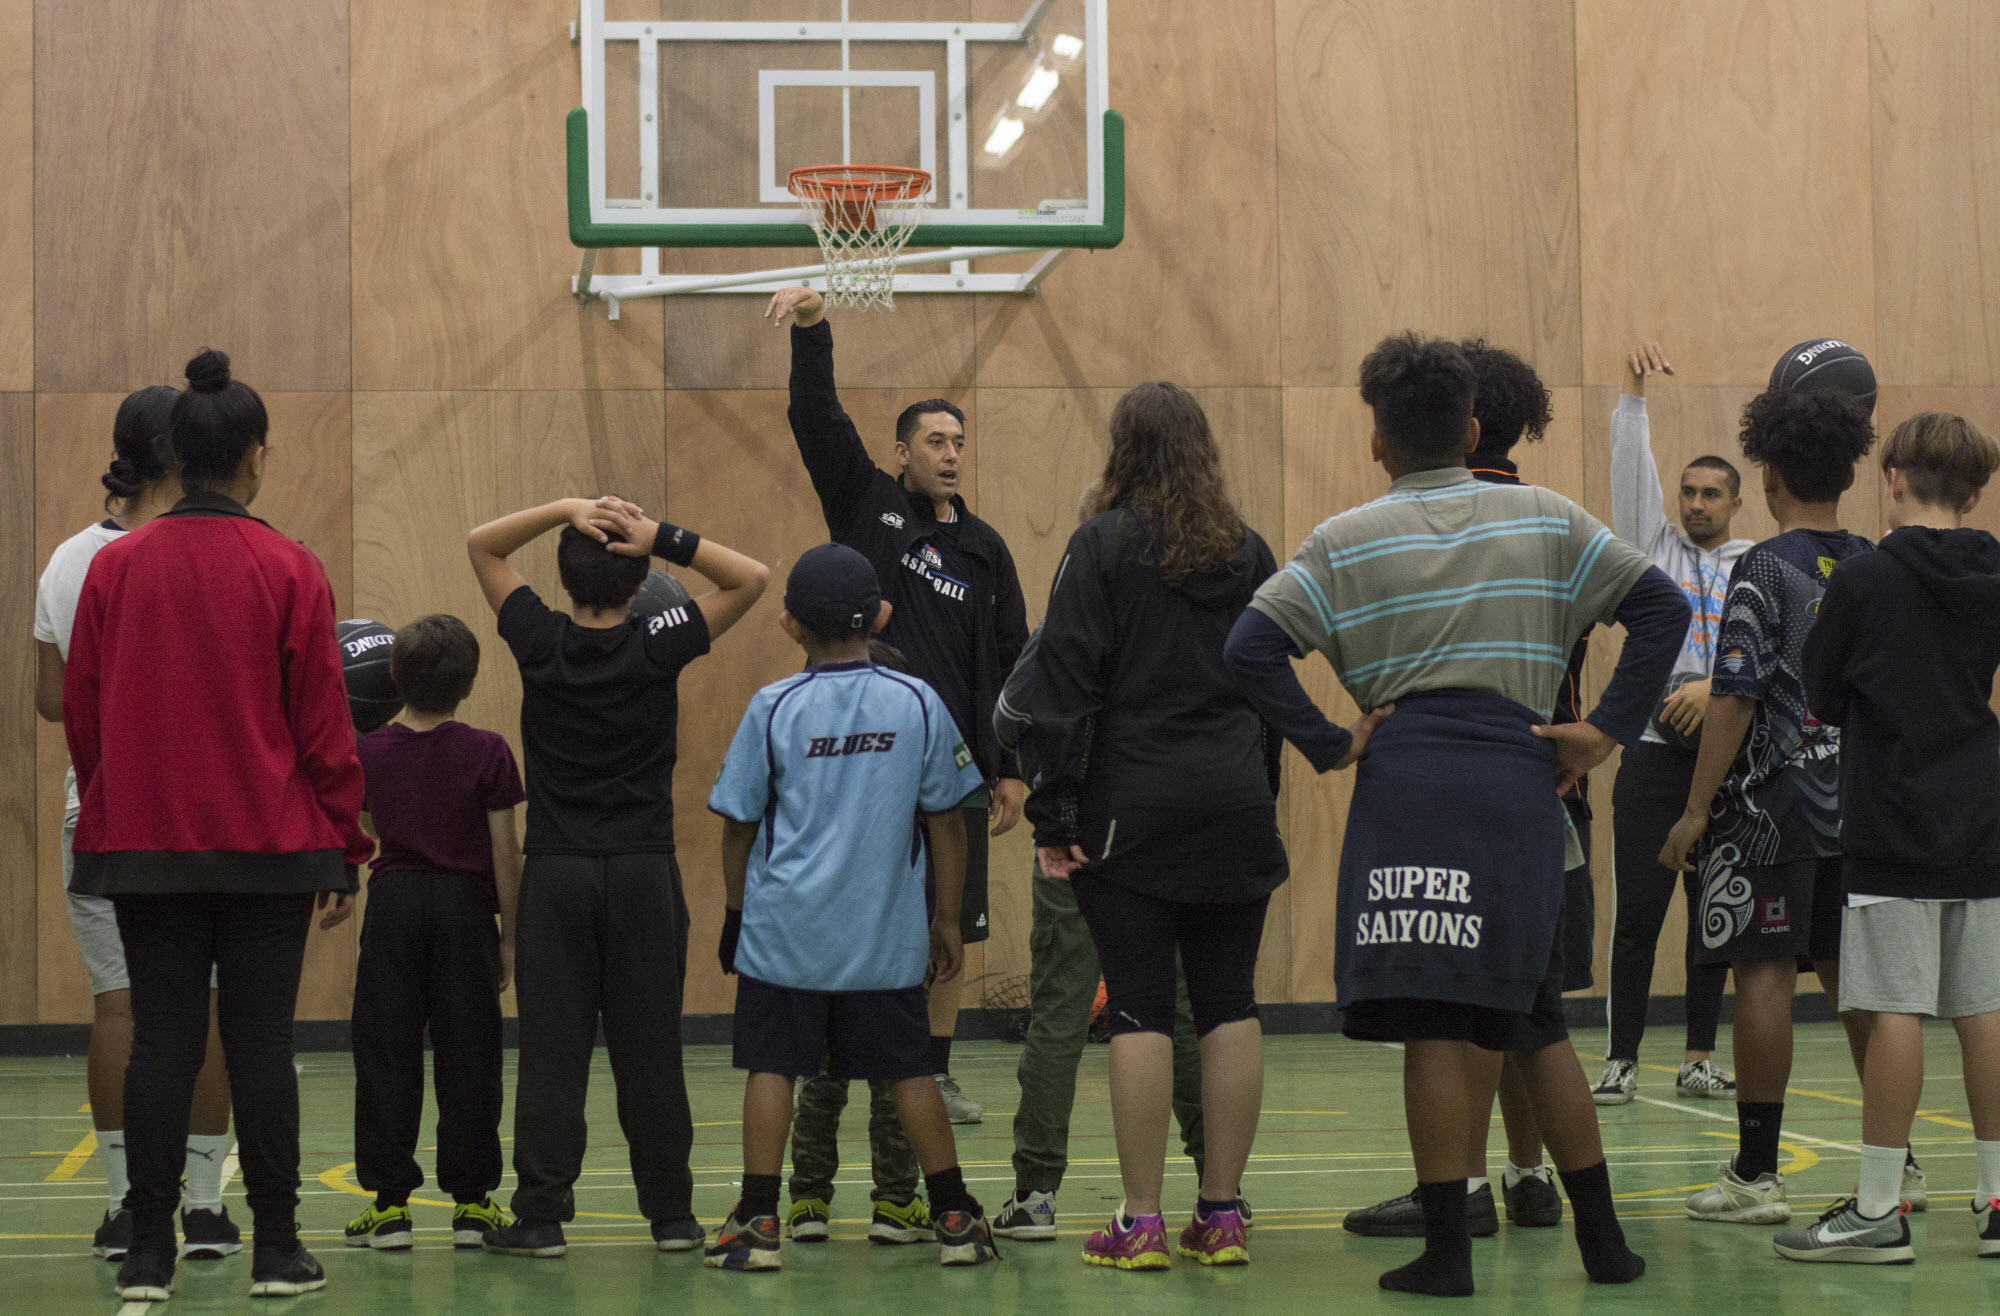 Children of different ages learning basketball